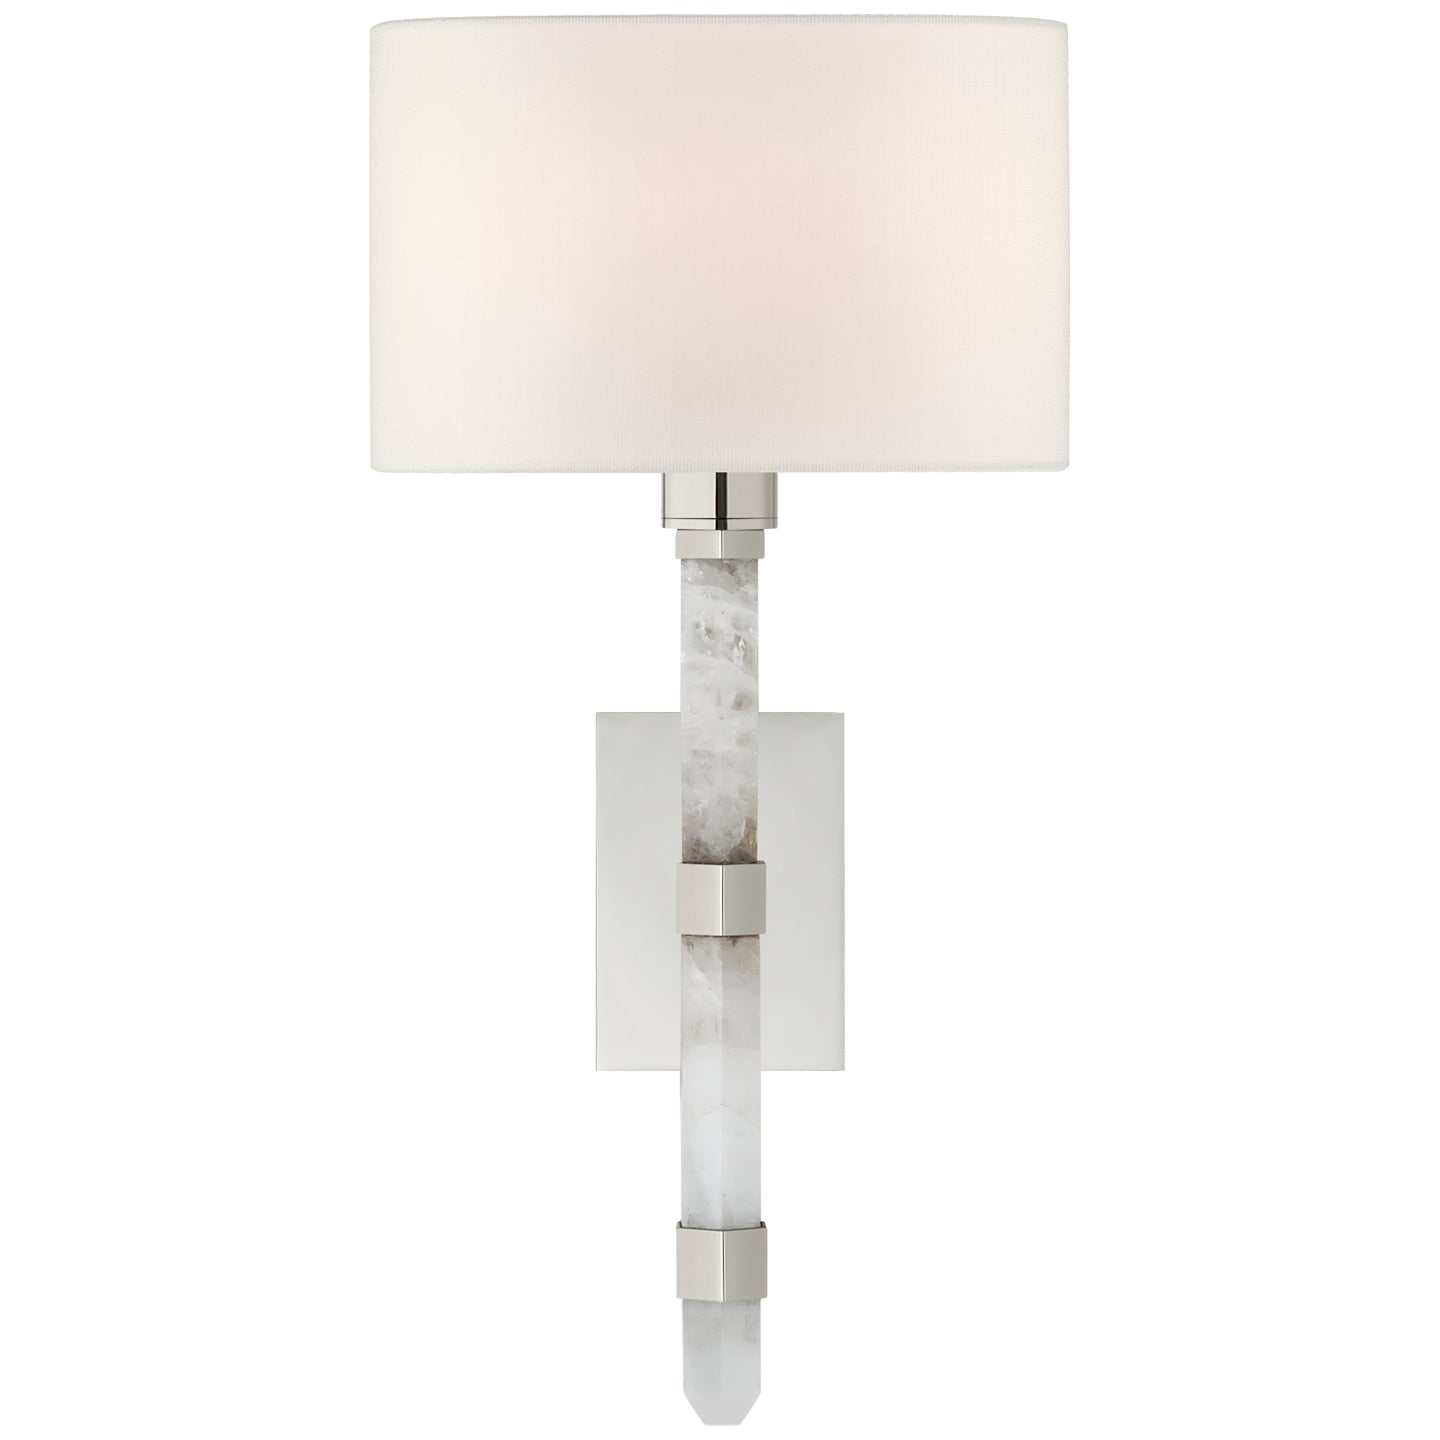 Load image into Gallery viewer, Visual Comfort Signature - SK 2902PN/Q-L - One Light Wall Sconce - Adaline - Polished Nickel
